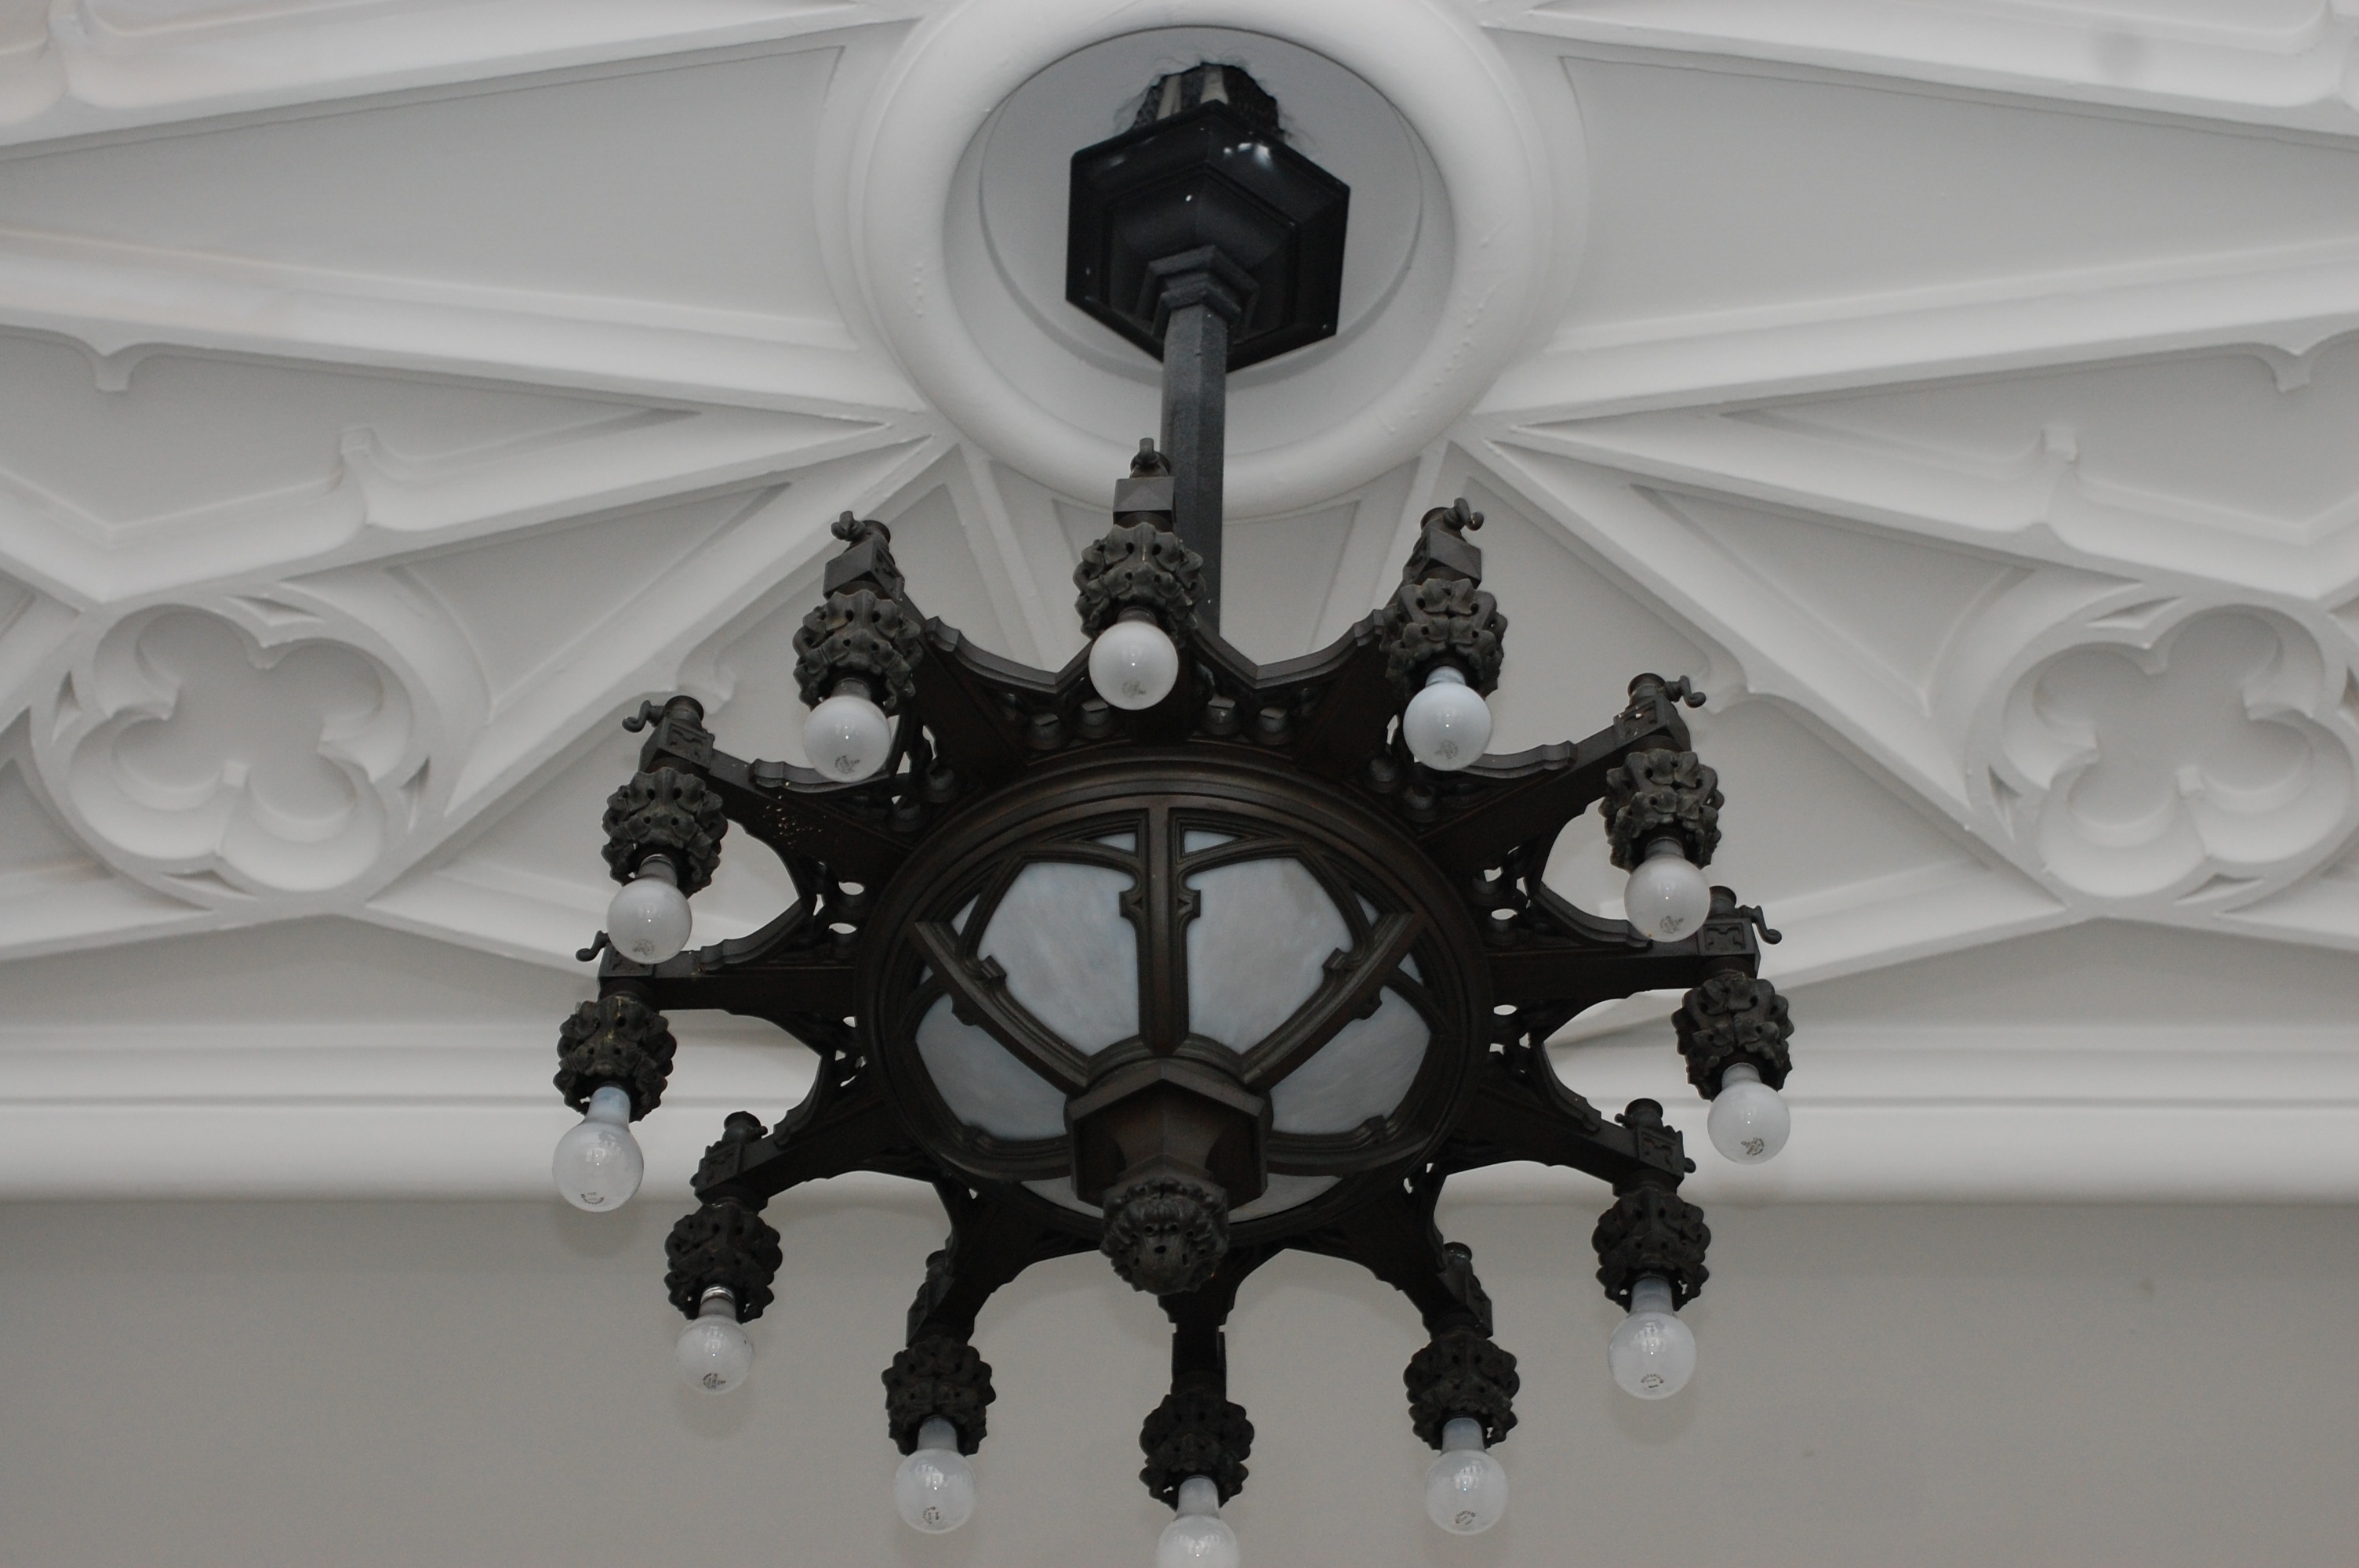 Ornate plasterwork can be found in locations throughout the school.